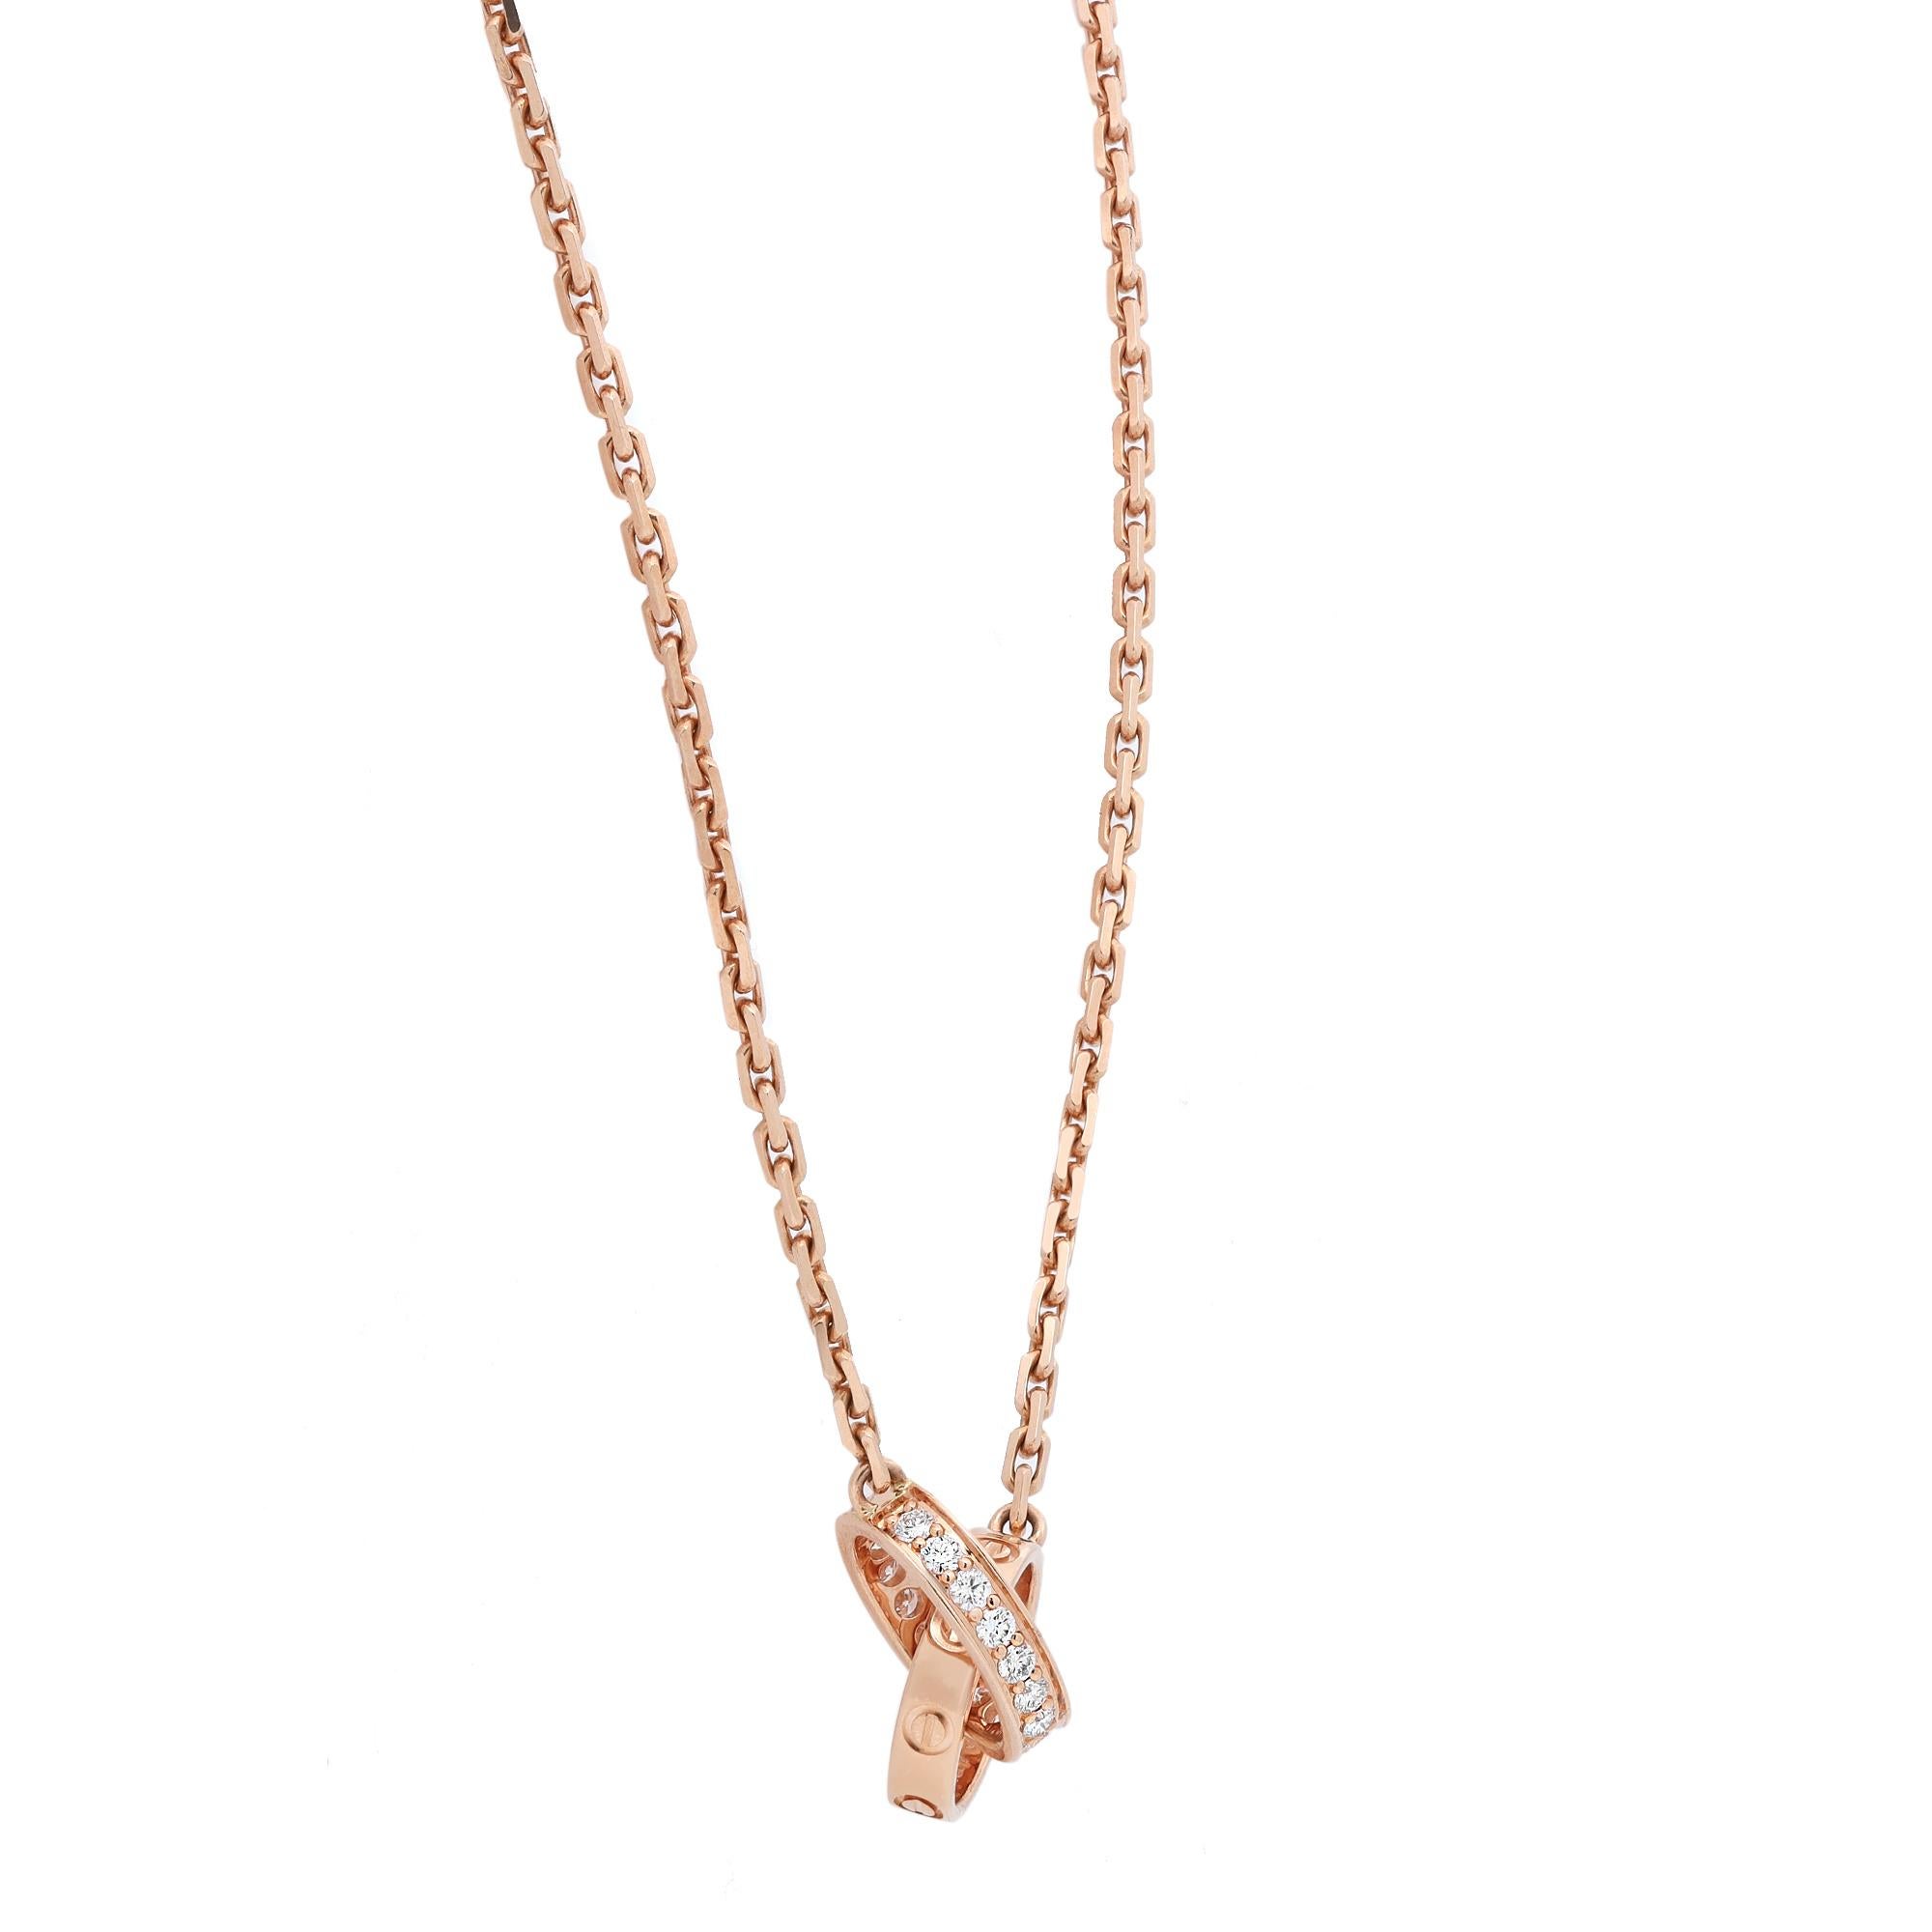 Cartier Love diamond necklace, crafted in 18K rose gold. This stunning necklace is accentuated by 18 round brilliant cut diamonds weighing 0.22 carat. Width: 2.65 mm. Inner diameter: 7.6 mm. Chain length: 16.5 inches. Total weight: 7.30 grams.